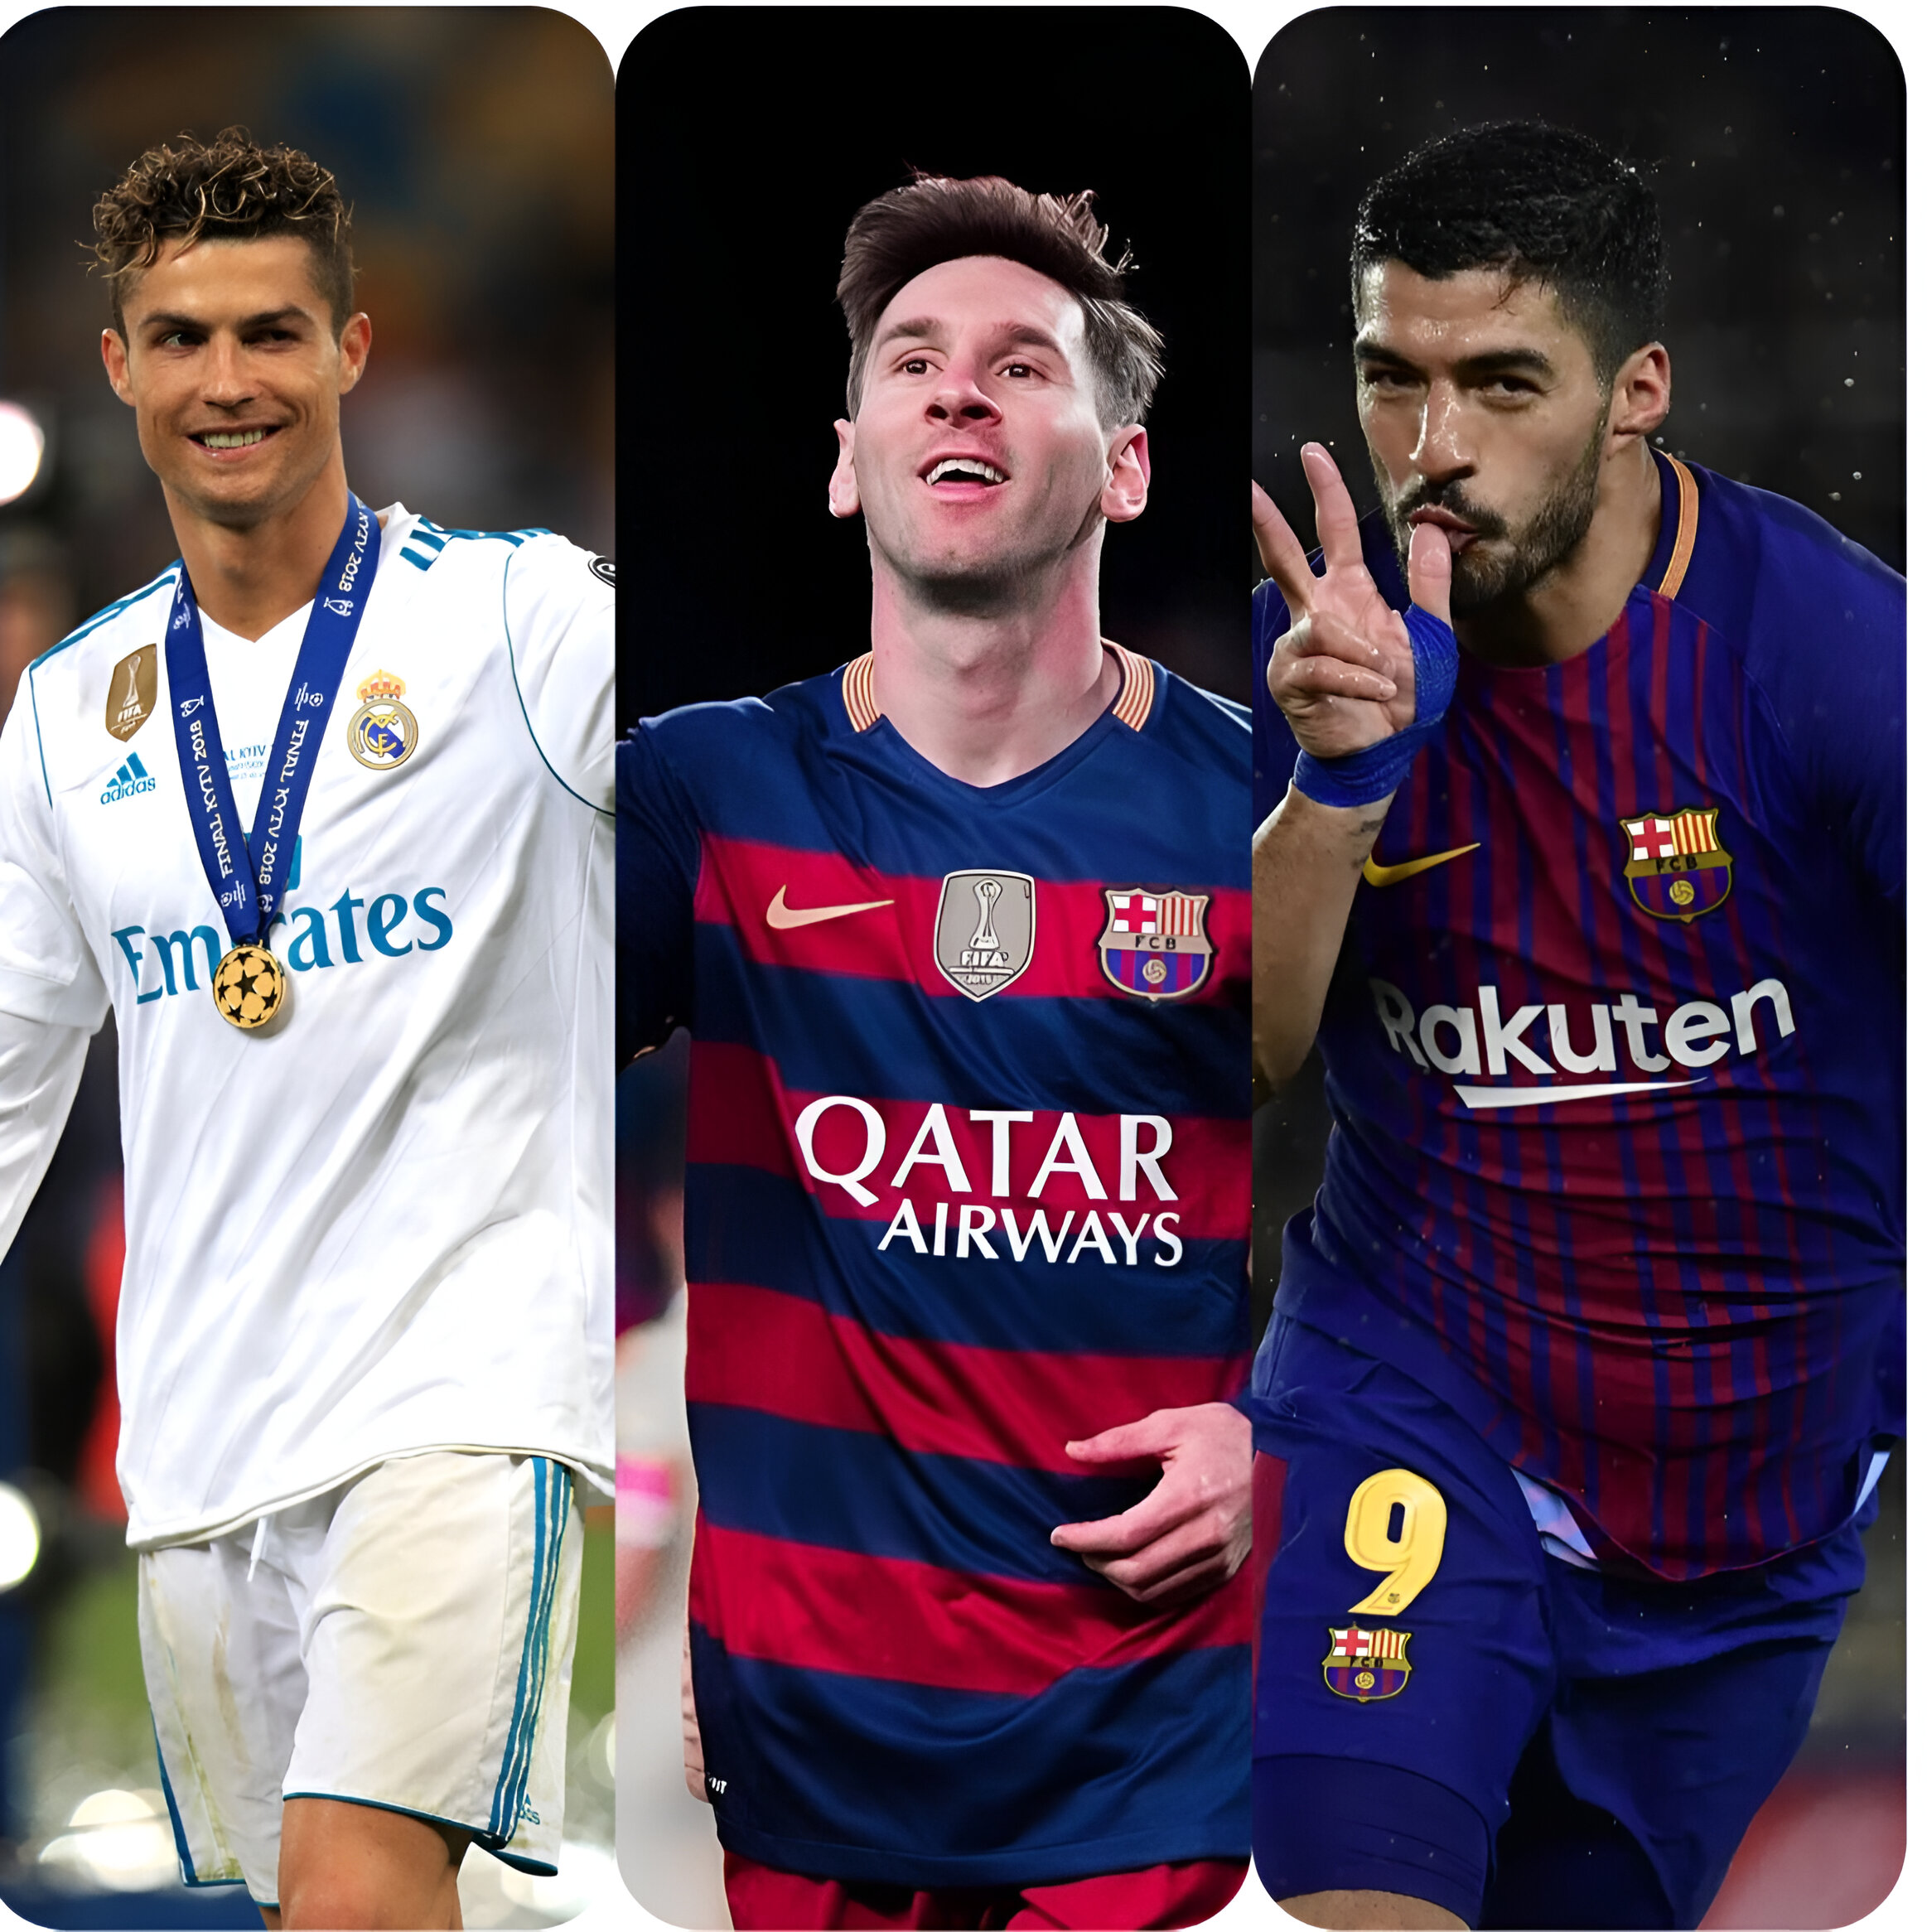 Top 5 Players with Most Goals & Assists in a Football Season